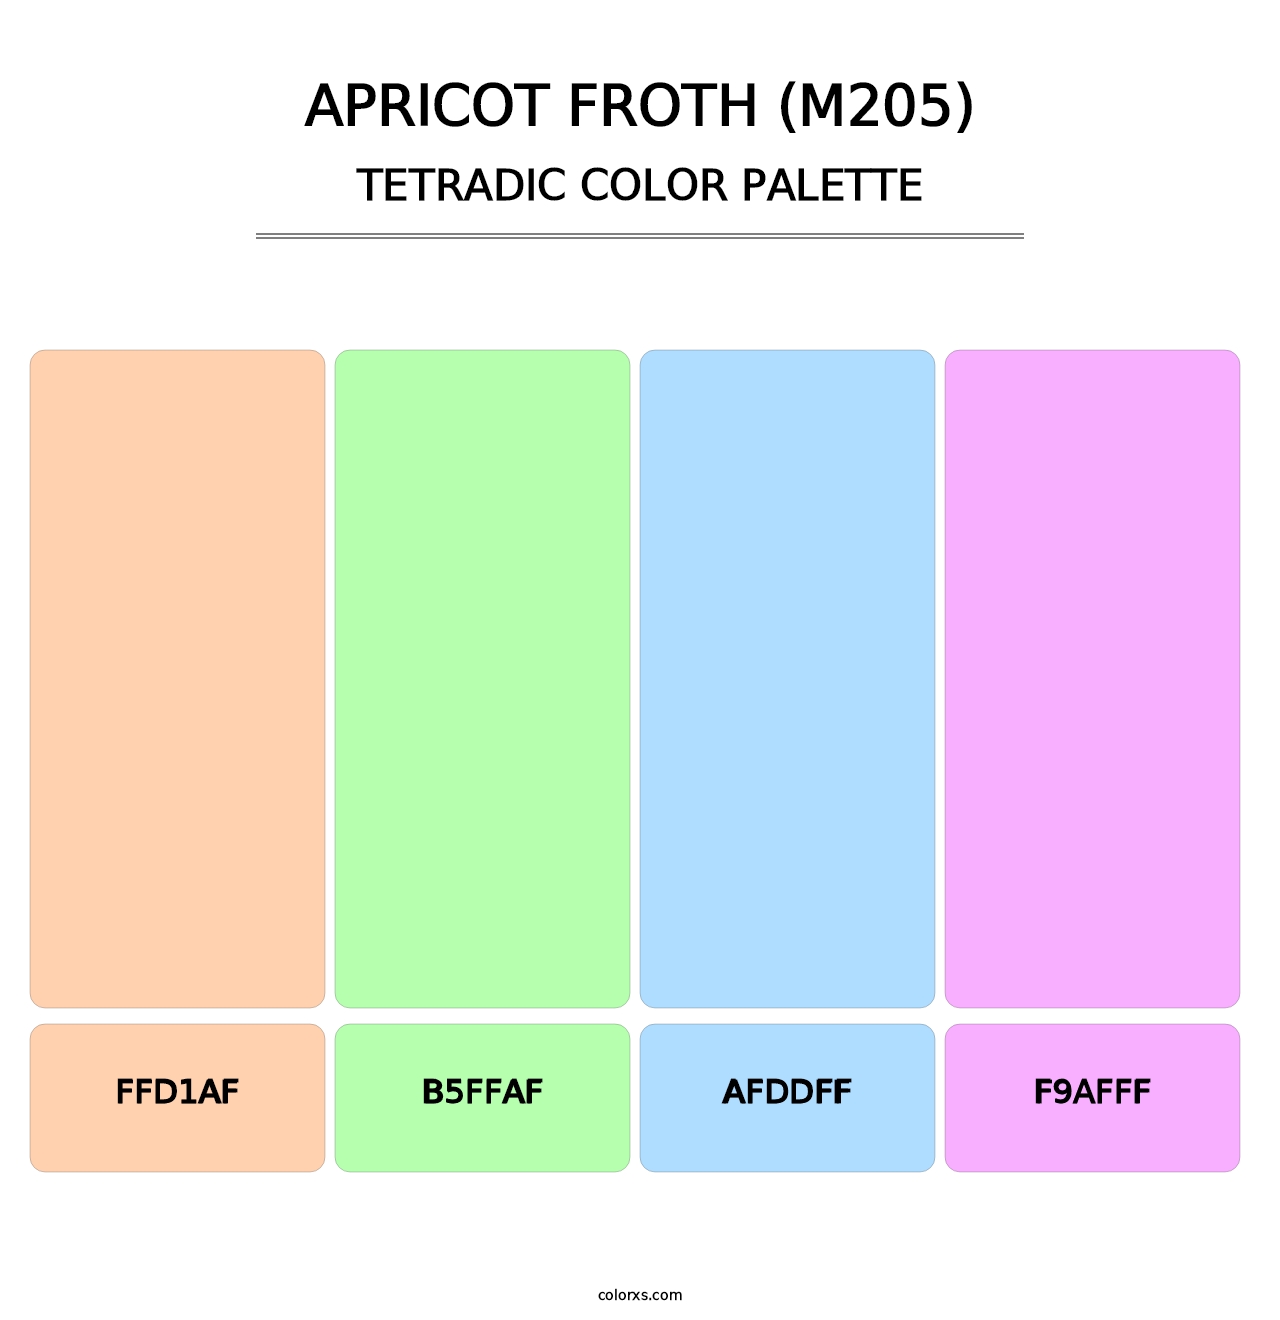 Apricot Froth (M205) - Tetradic Color Palette